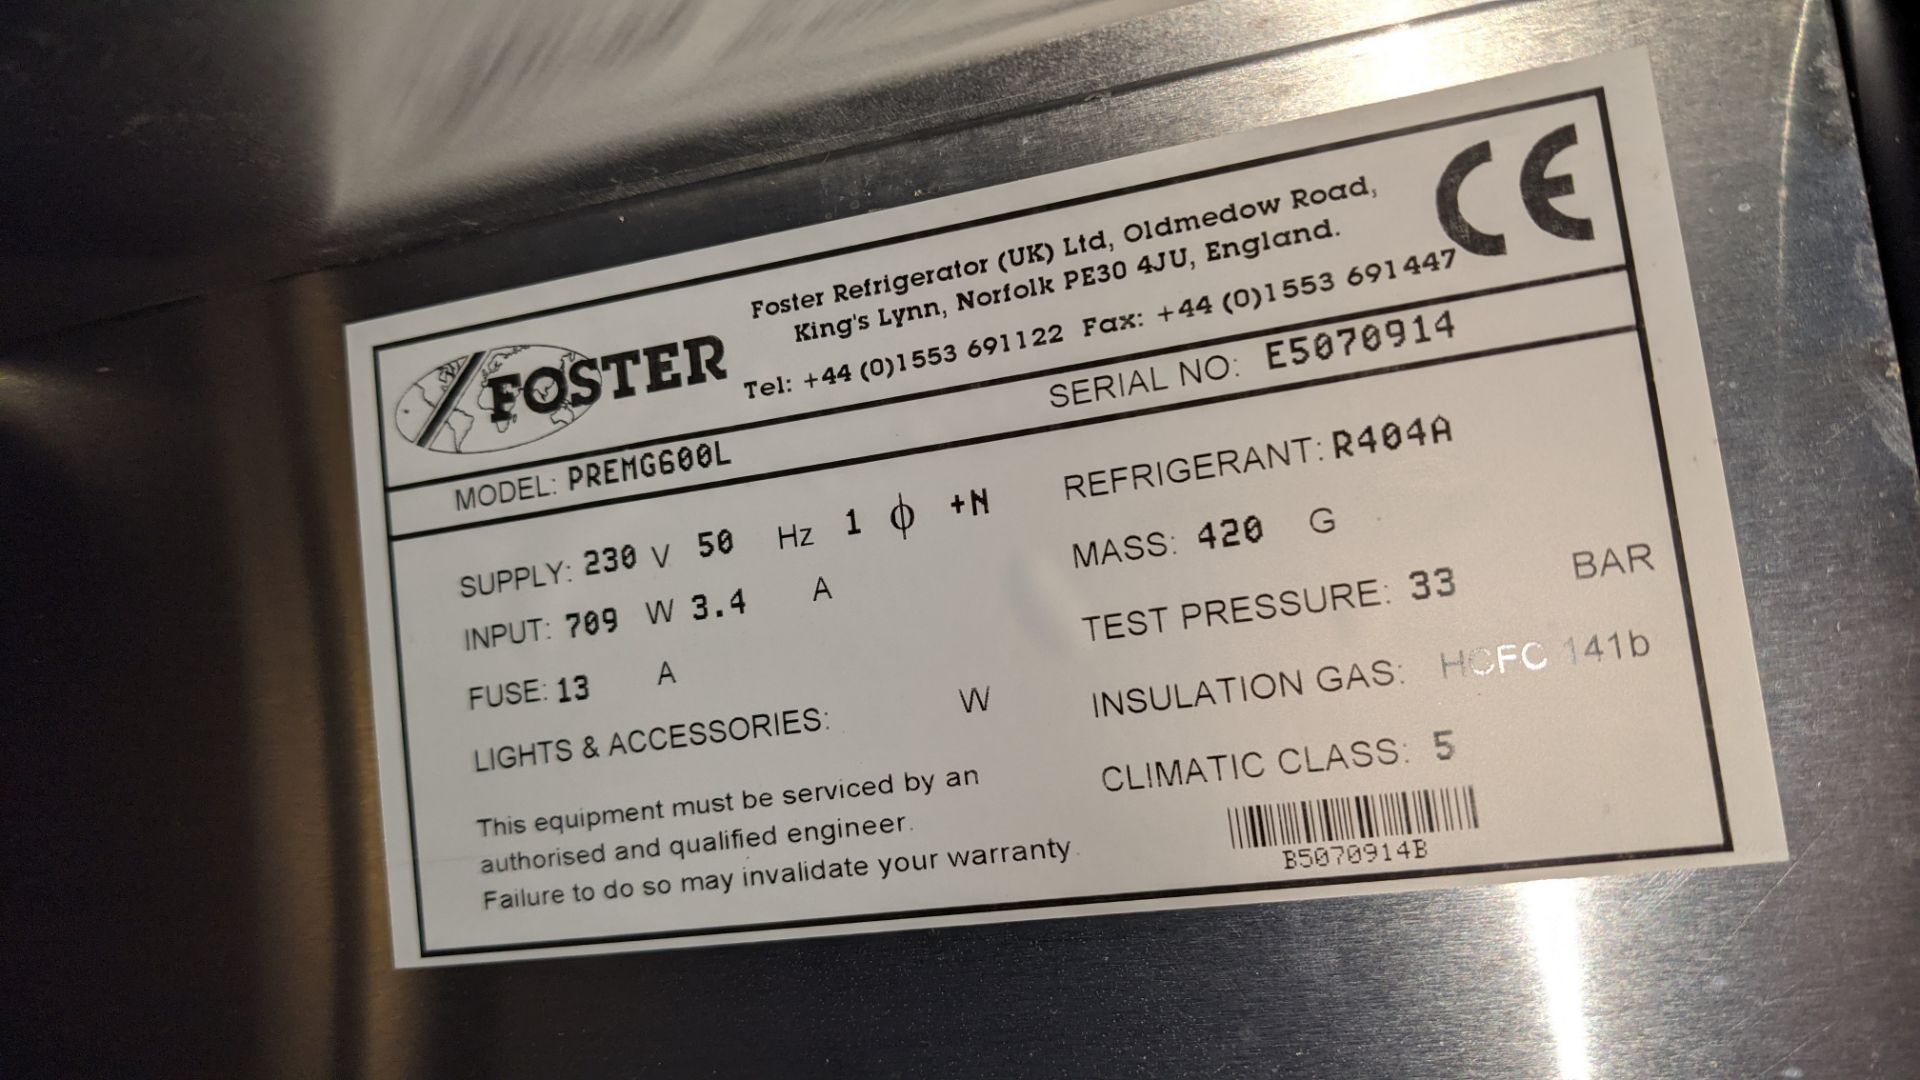 Foster PREMG600L stainless steel tall single door freezer - Image 5 of 6